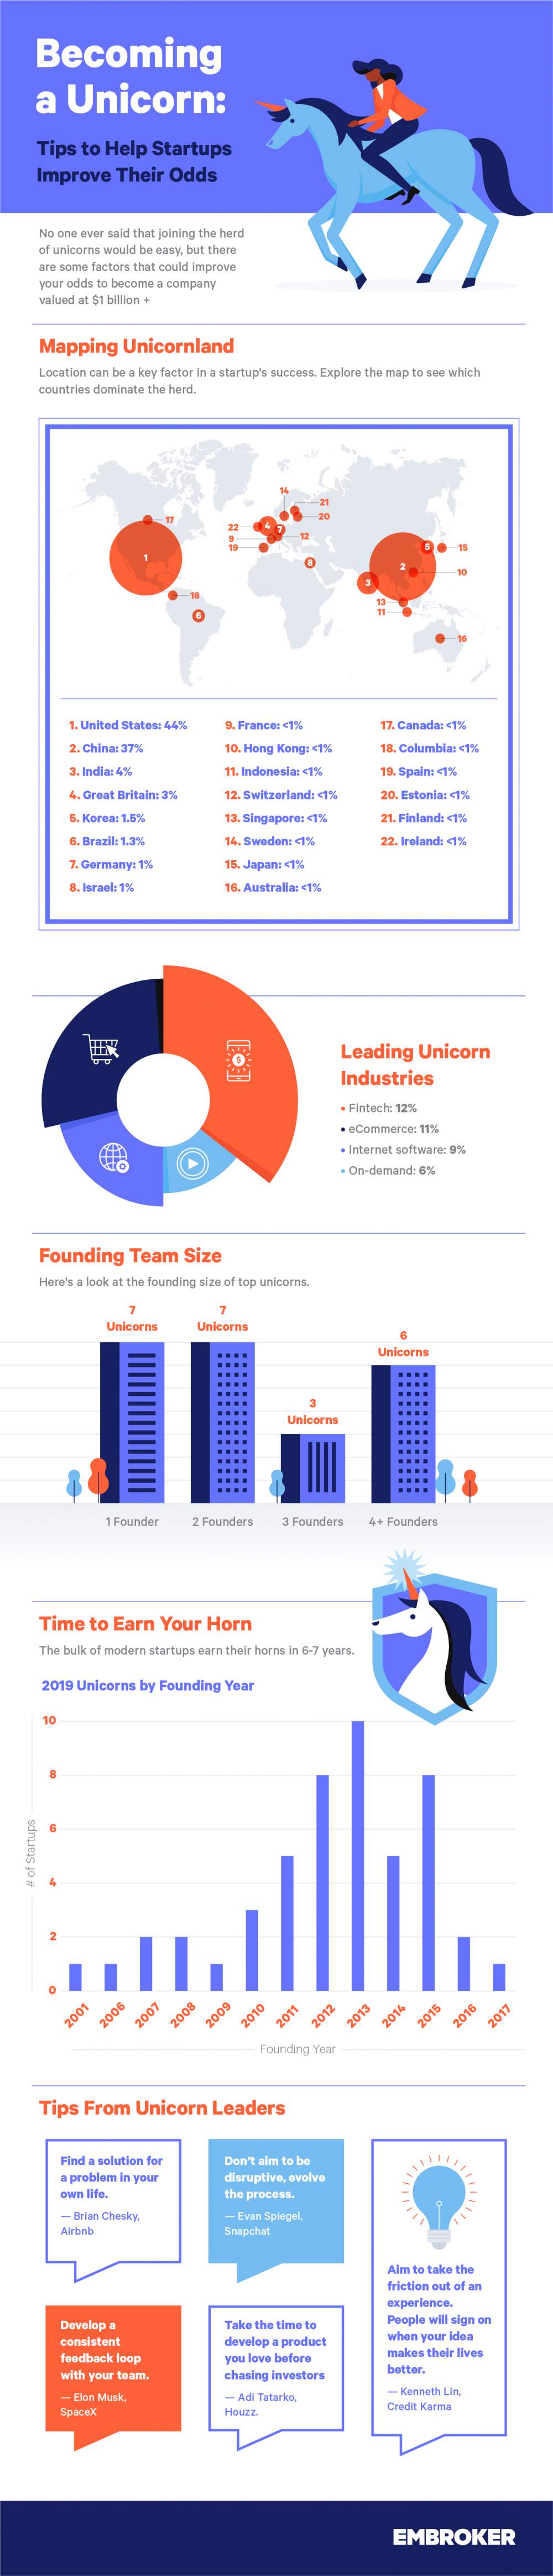 Unicorn Startups by Industry and Lessons from the $1B+ Club